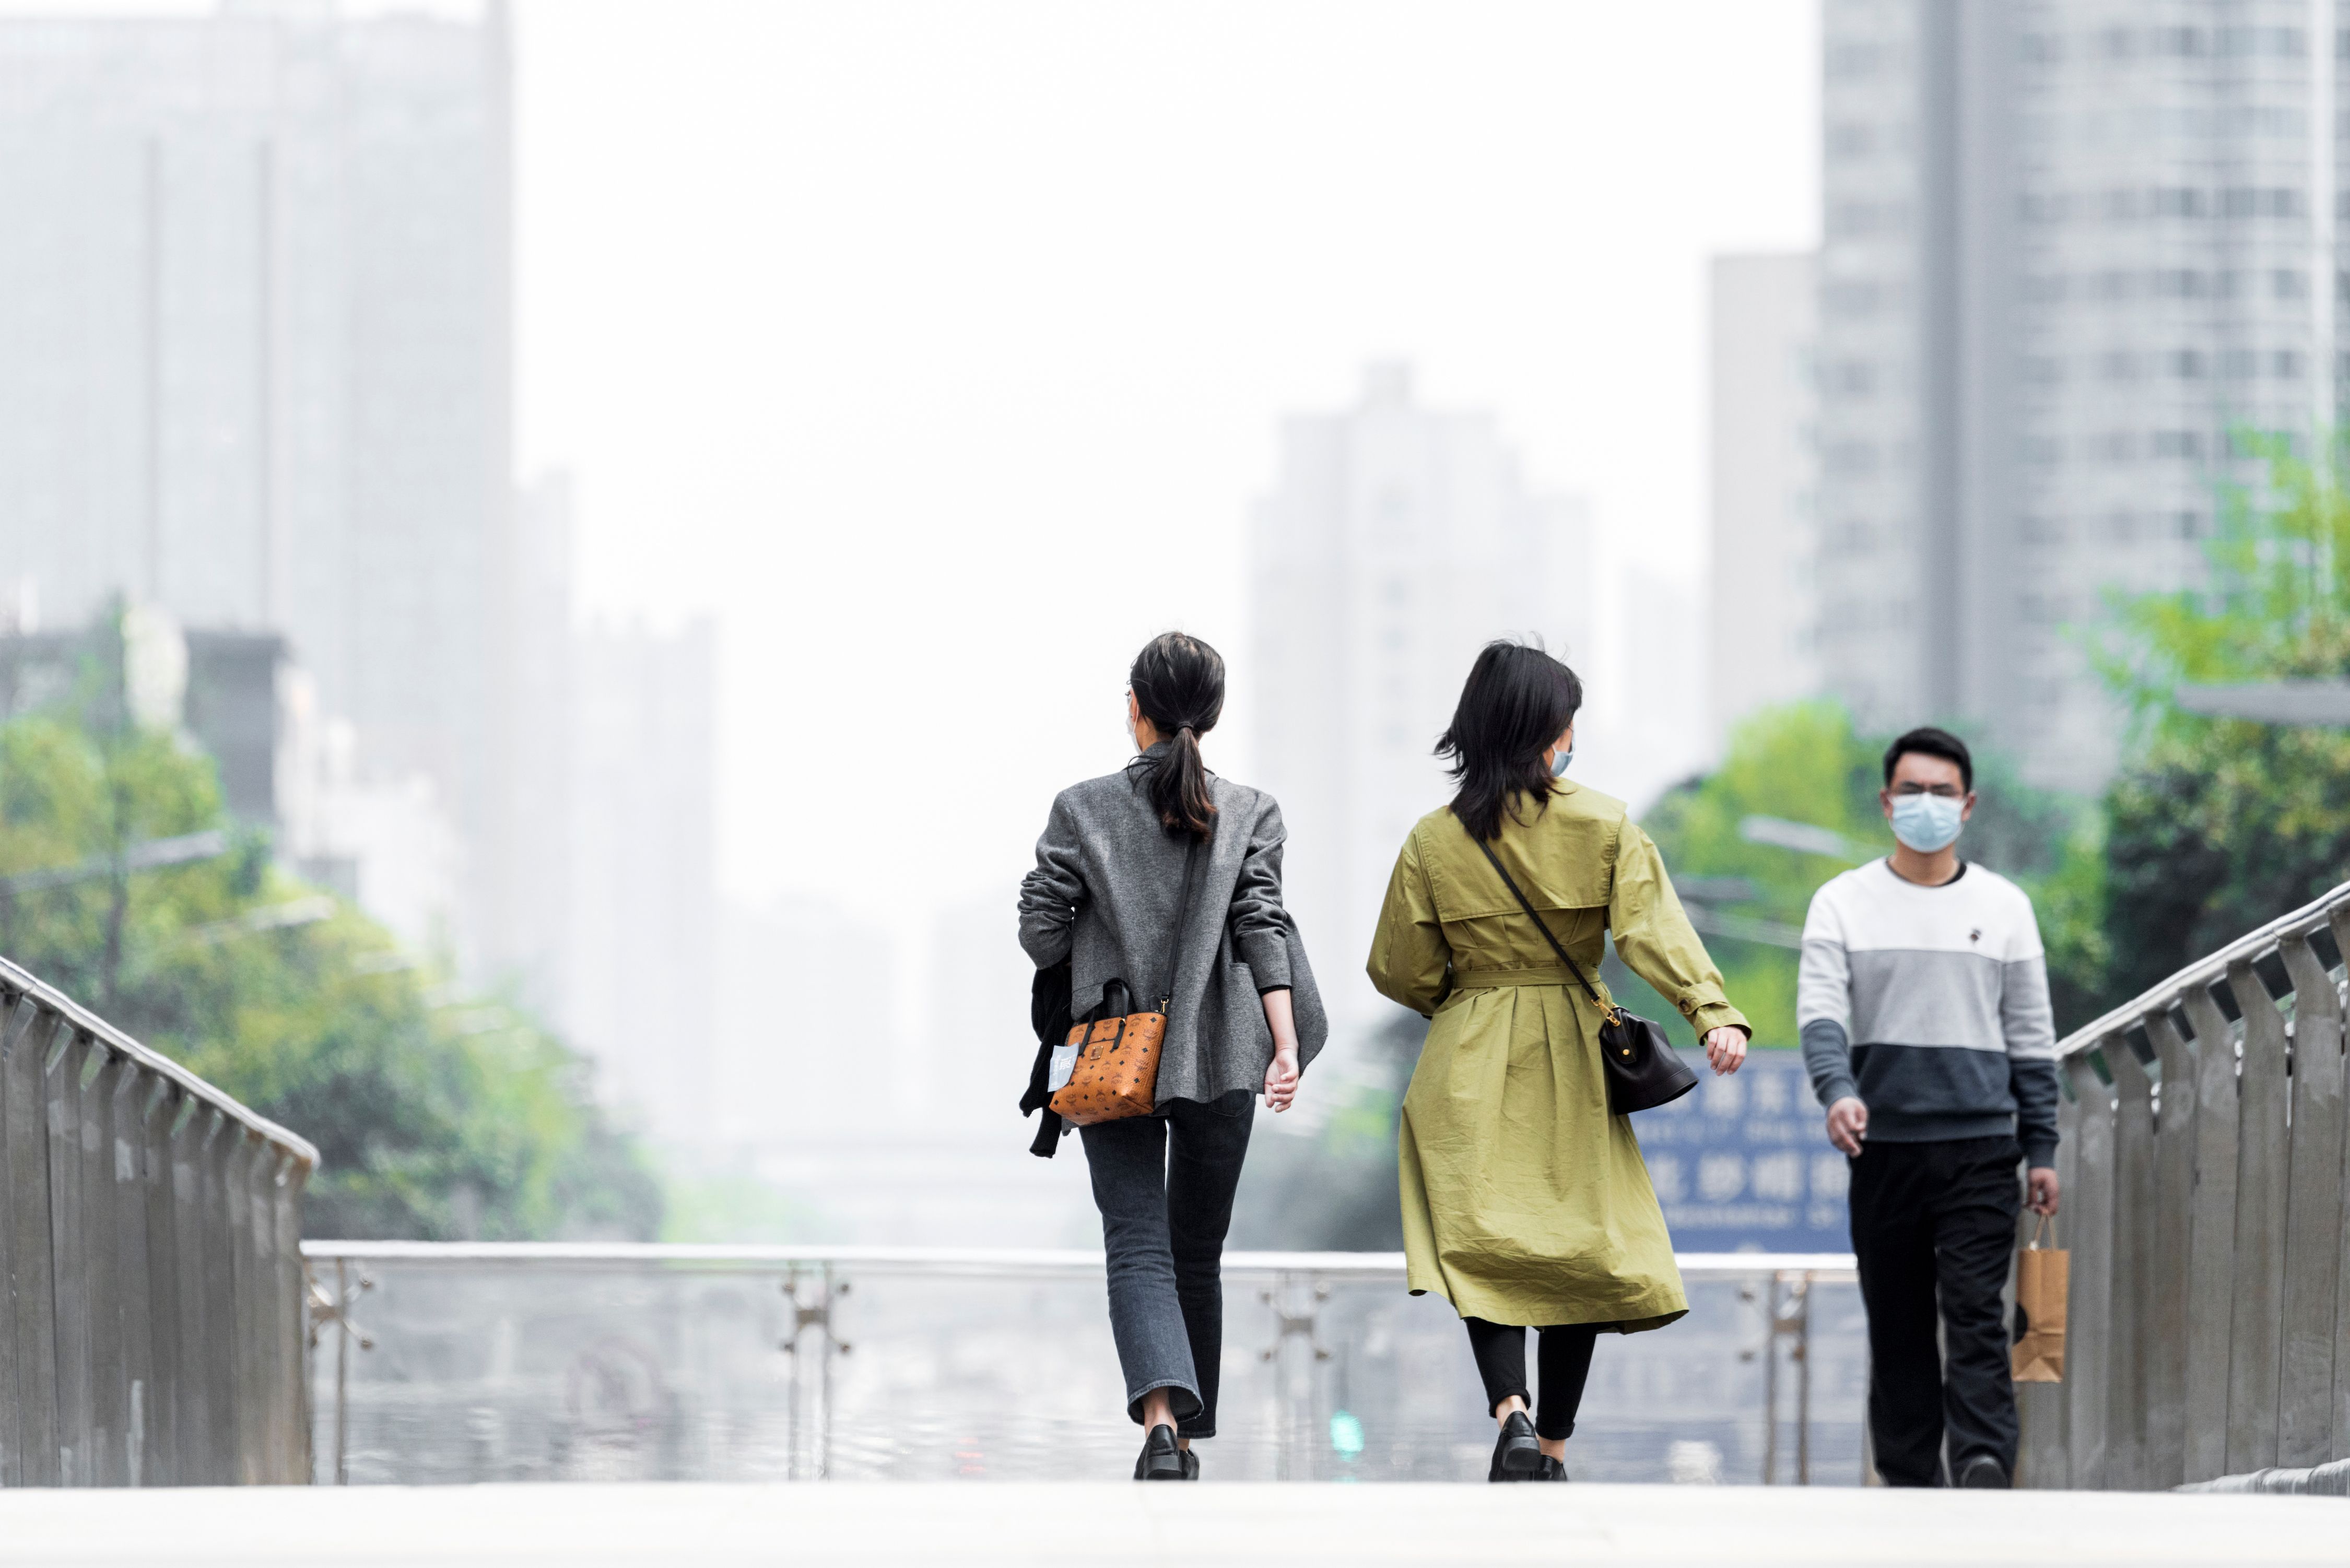 Shopping citizens in China's downtown center wear masks as the city recovers from the COVID-19 epidemic. Image by B.Zhou/Shutterstock. China, 2020